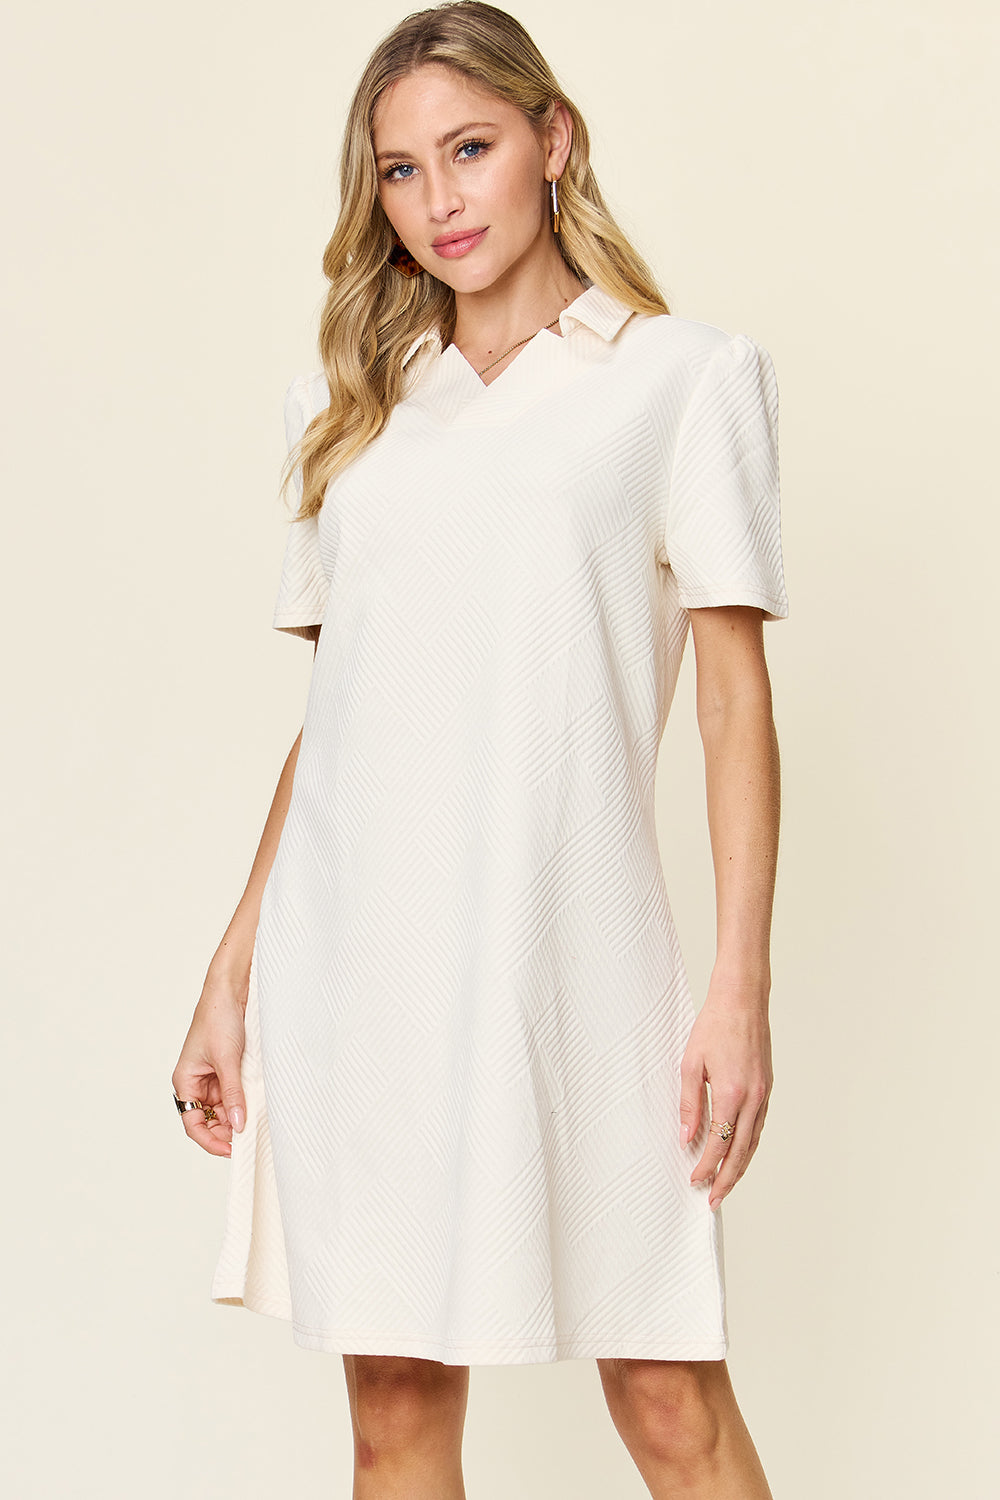 Double Take Full Size Texture Collared Neck Short Sleeve Dress White